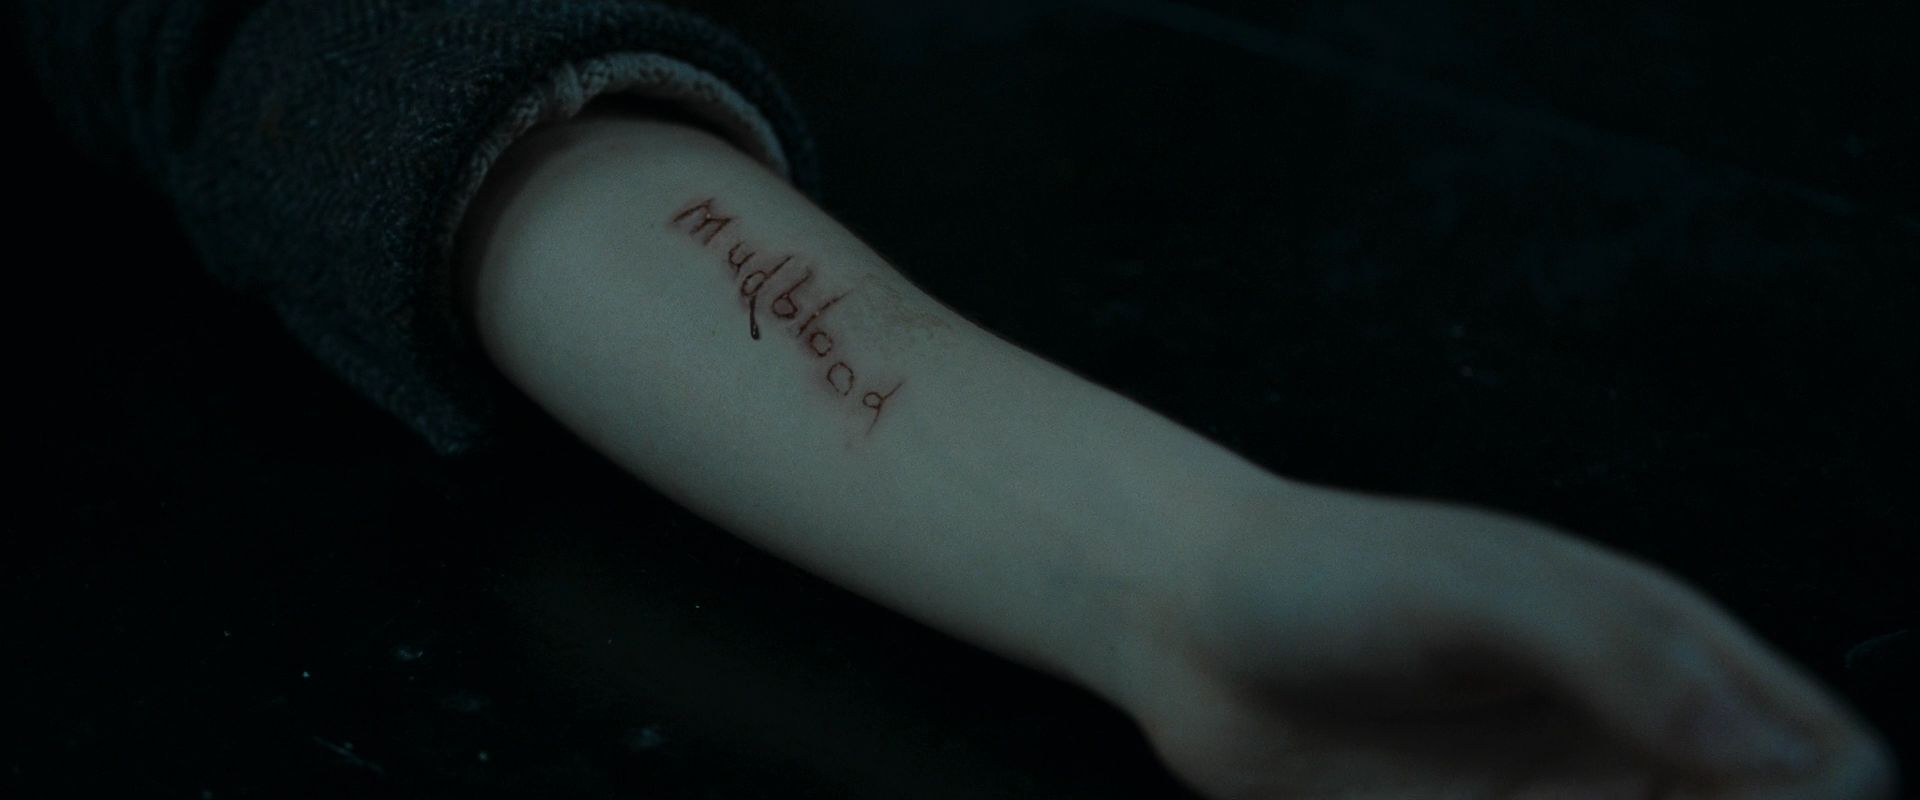 Mudblood Carved Into Hermione's Arm.